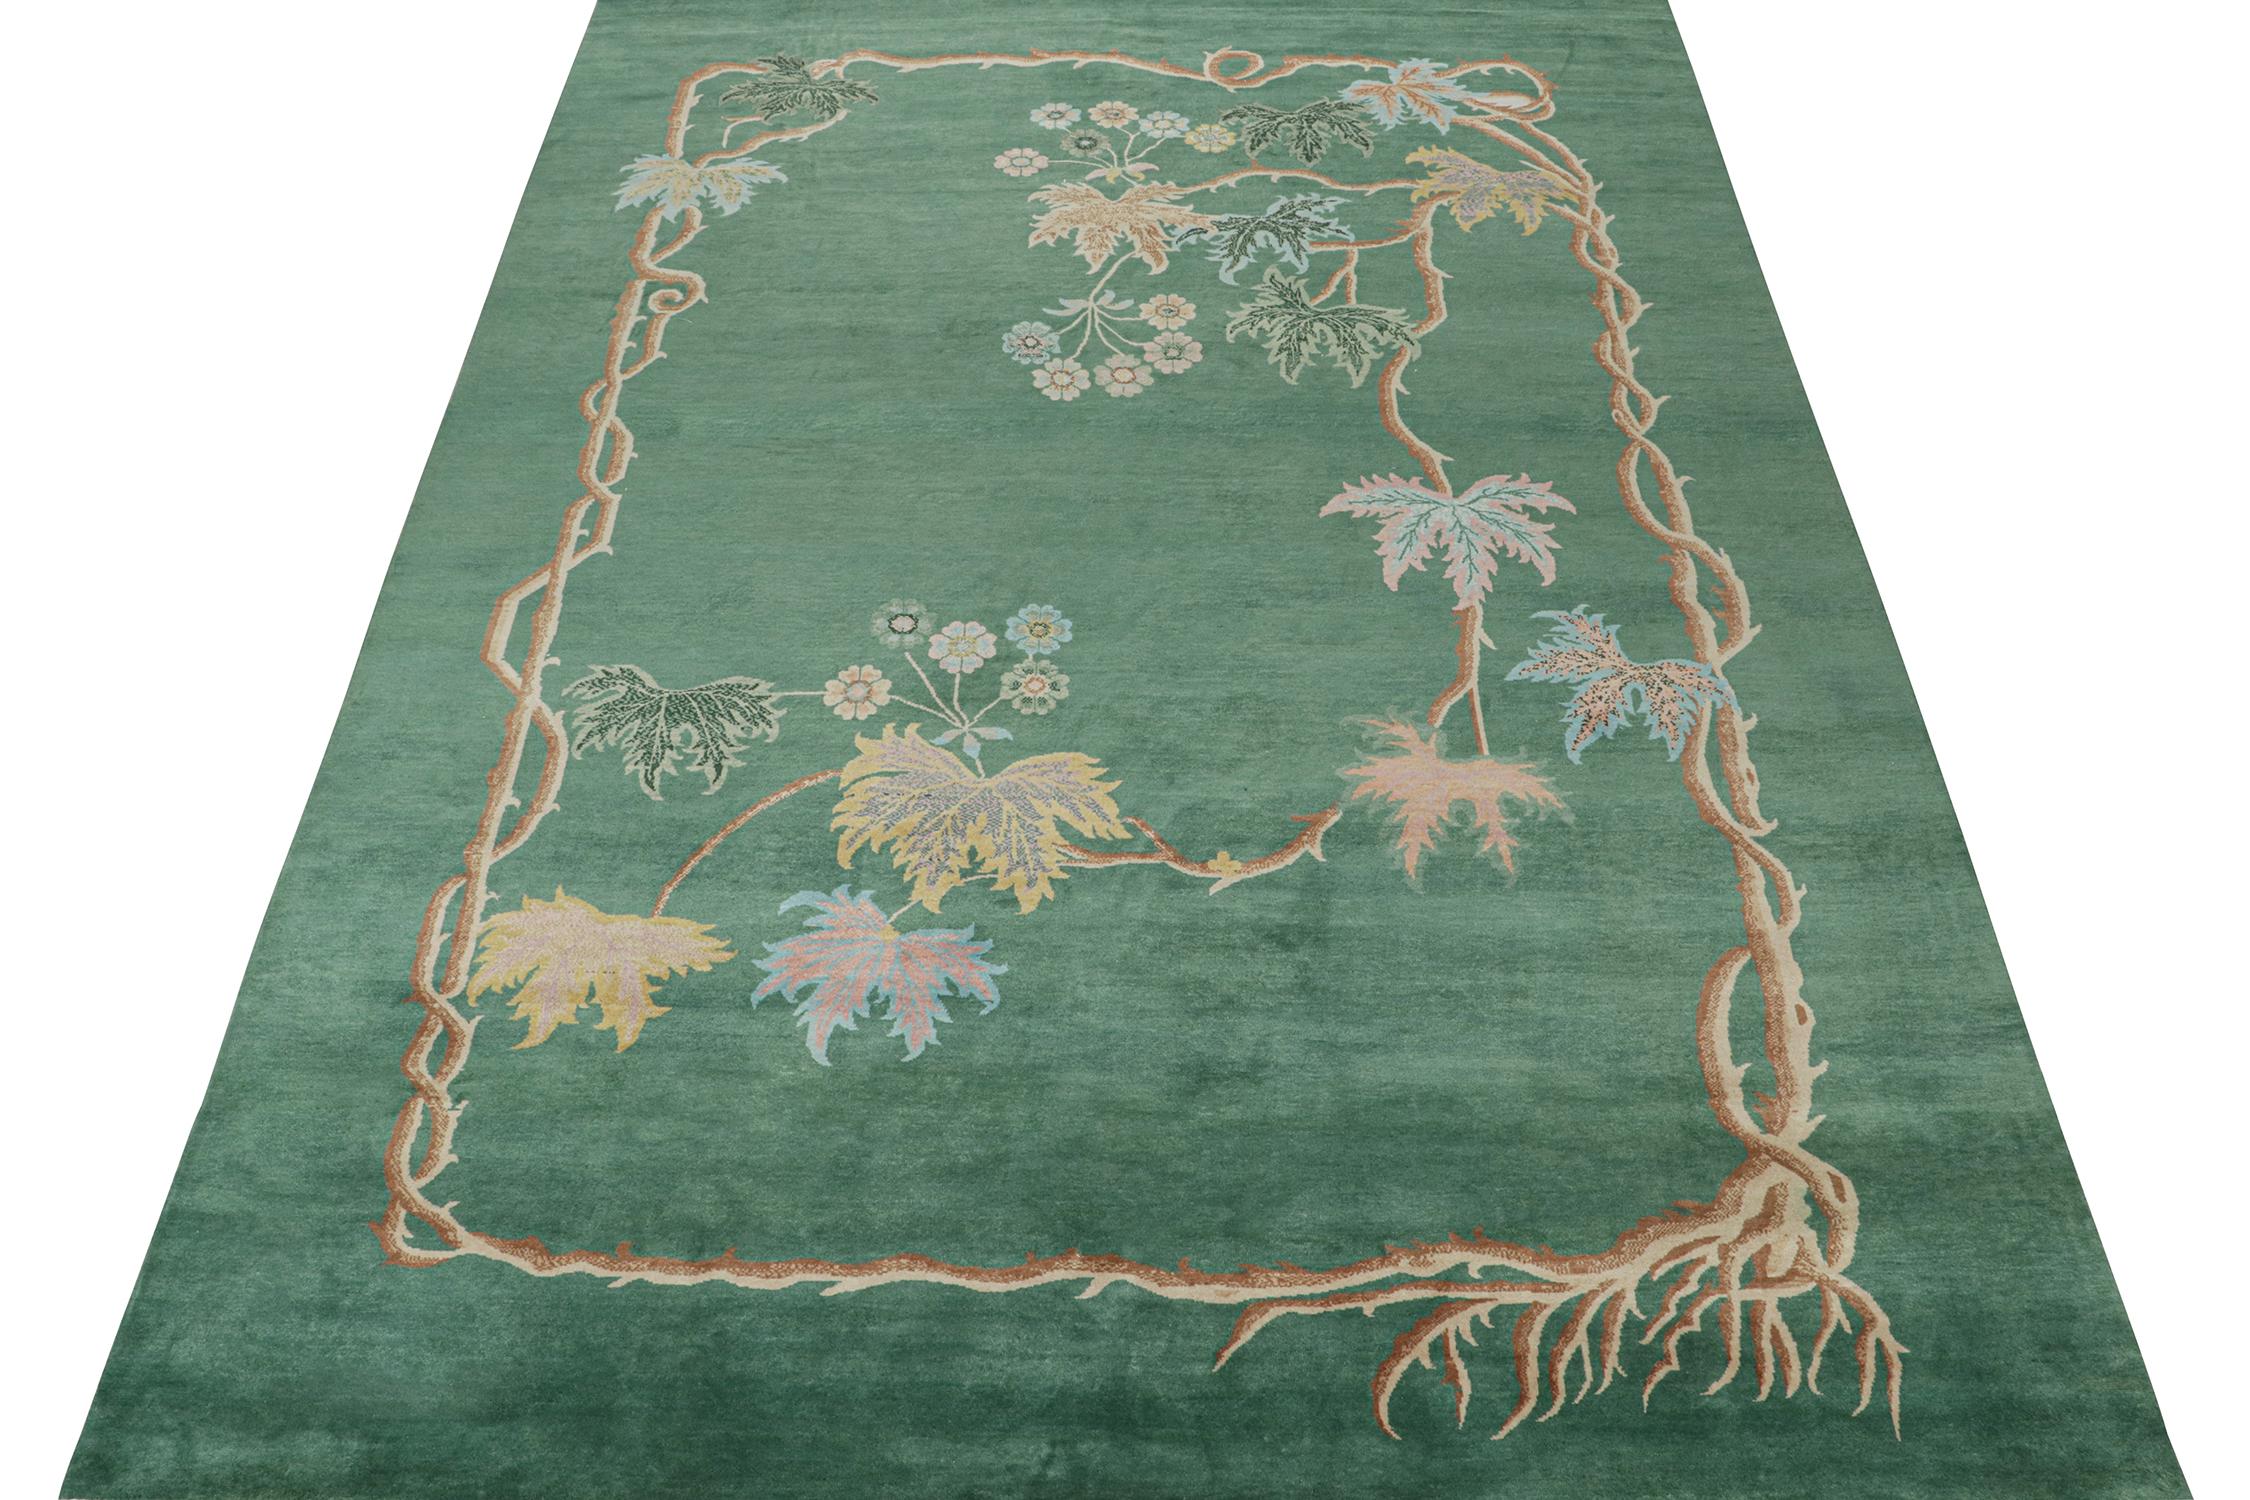 This 10x14 ode to Chinese Art Deco rugs is the next addition to Rug & Kilim's inspired new Deco Collection. 

Further On the Design:

The piece enjoys an emphasis on forest green with teal notes, and a finely detailed floral patterns within.